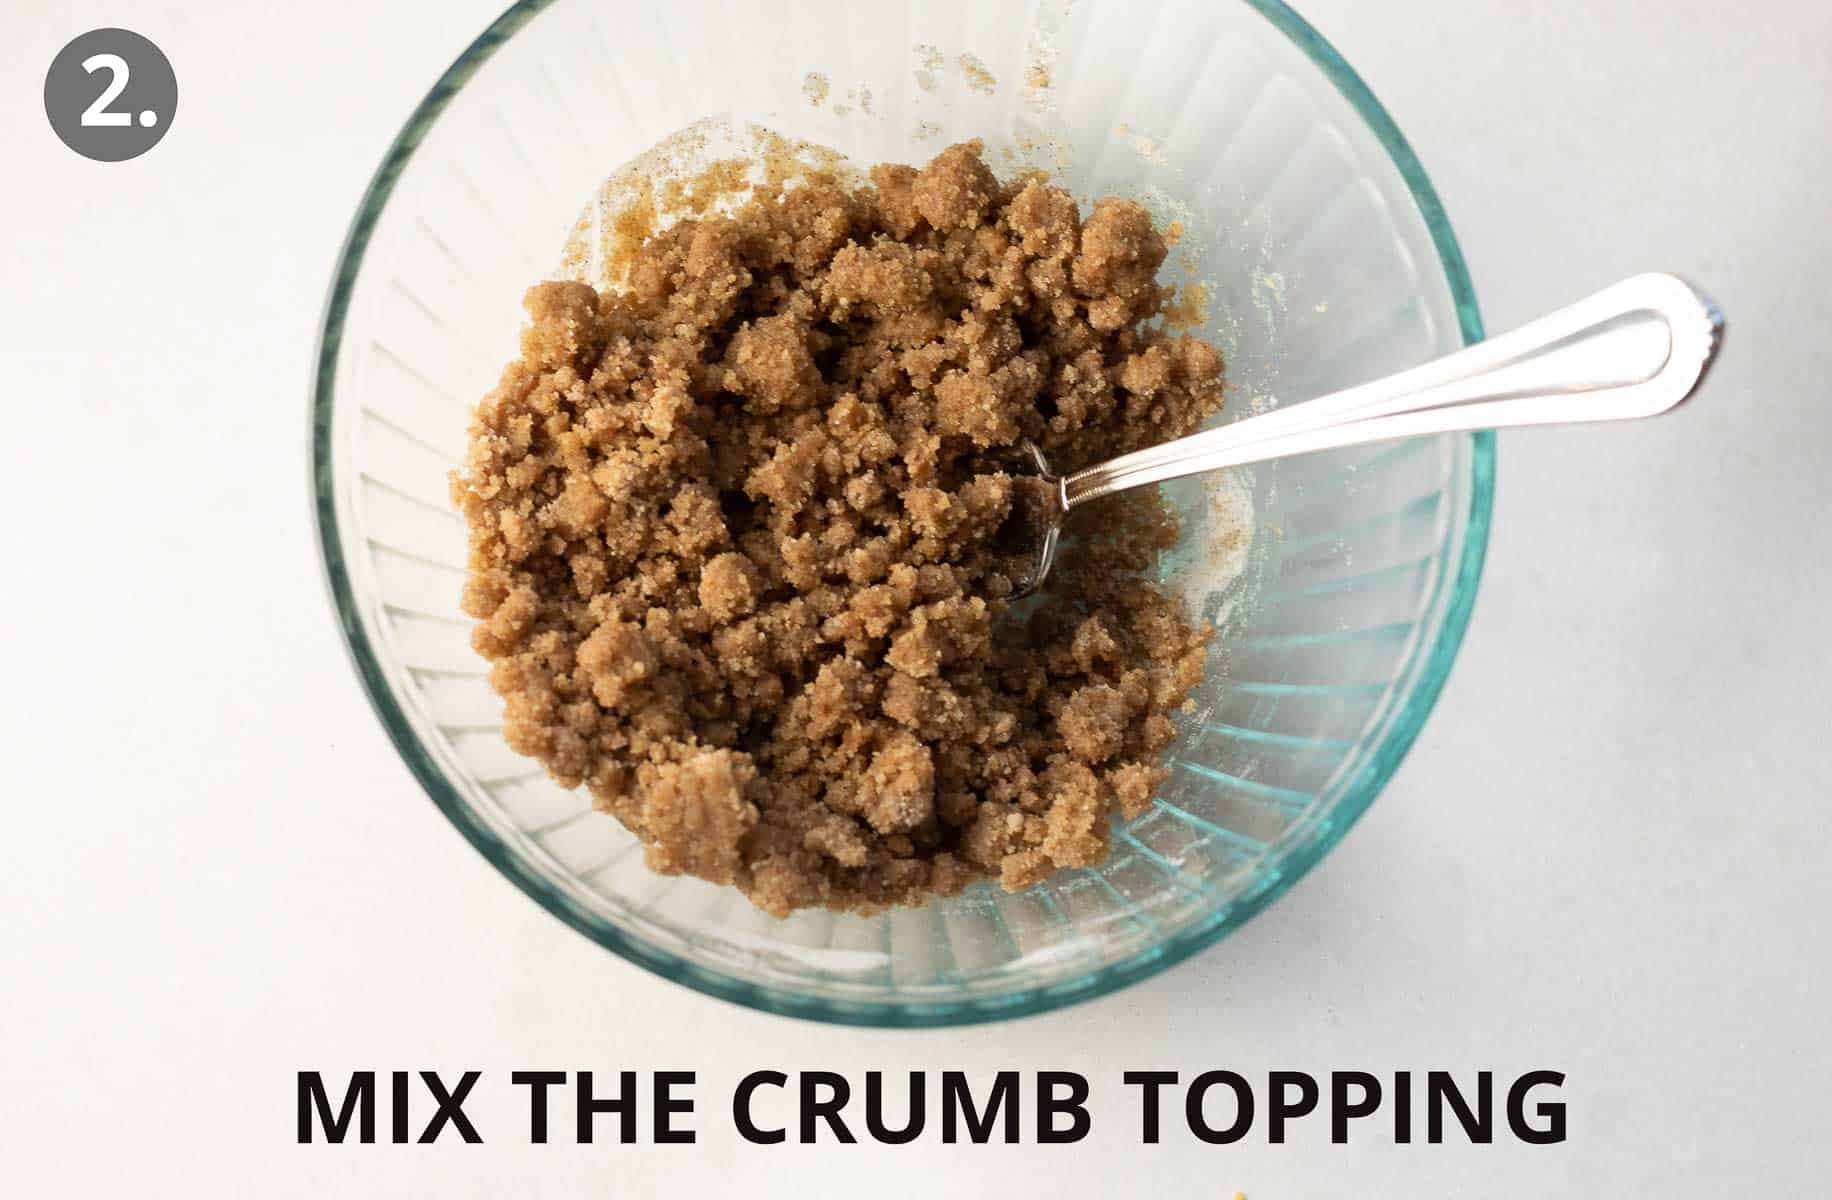 A glass bowl with crumb topping ingredients and a spoon